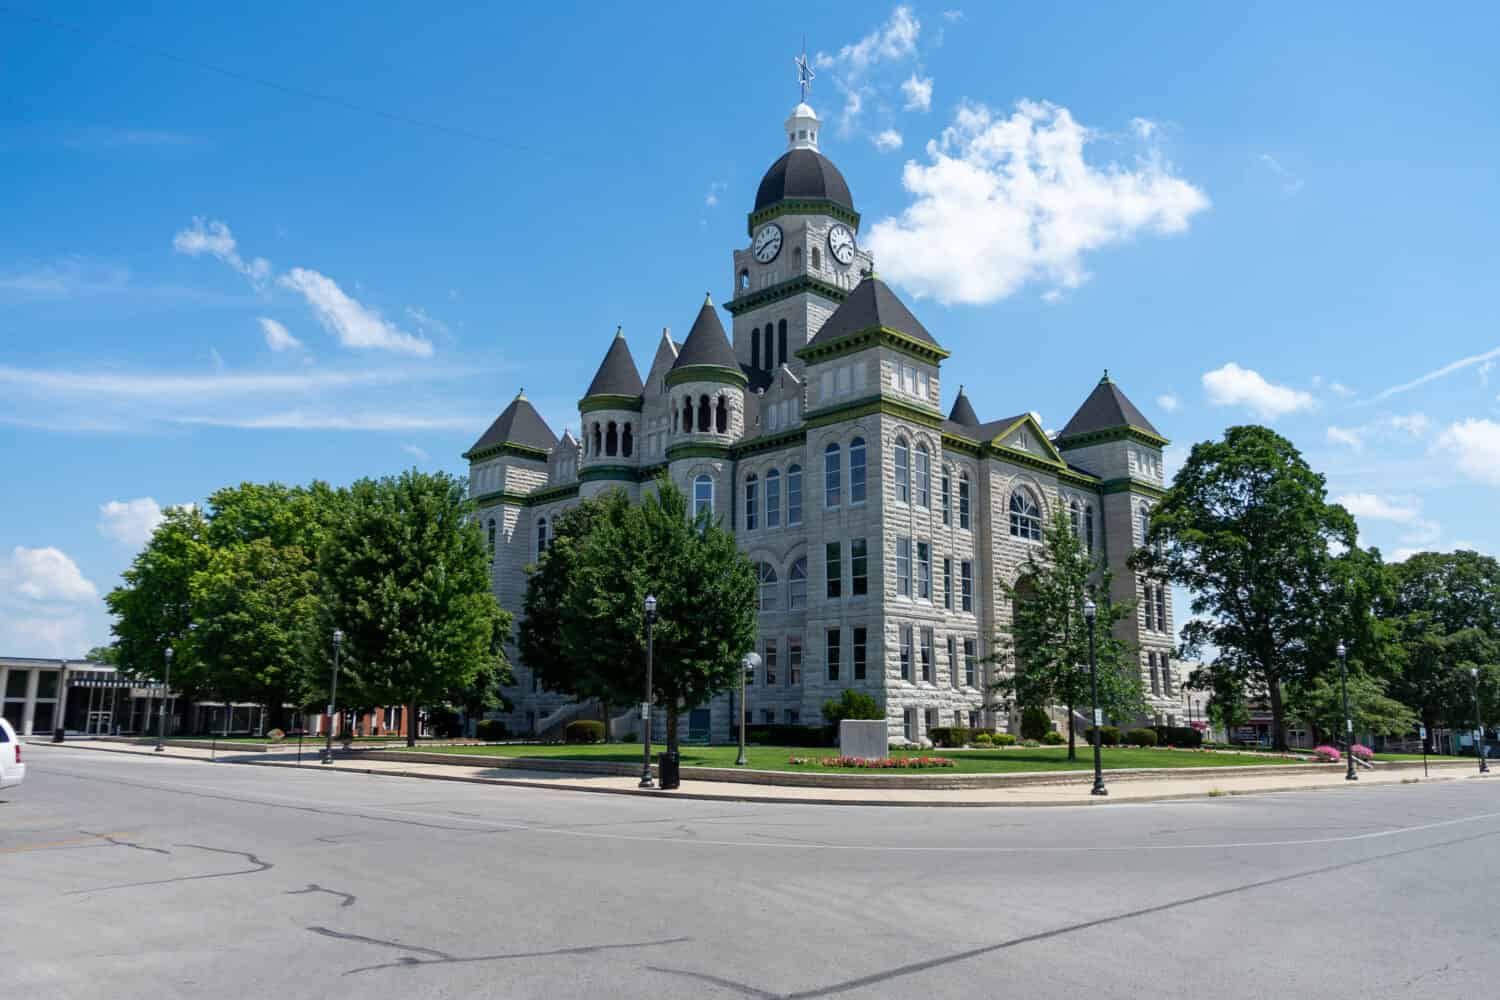 <p>Carthage sits roughly halfway between Joplin and Springfield, and it is one of the nine Missouri cities intersected by Route 66. Today, visitors flock to the town for its historic sites like the Jasper County Courthouse and Historic Carthage Square.</p><p>Sharks, lions, alligators, and more! Don’t miss today’s latest and most exciting animal news. <strong><a href="https://www.msn.com/en-us/channel/source/AZ%20Animals%20US/sr-vid-7etr9q8xun6k6508c3nufaum0de3dqktiq6h27ddeagnfug30wka">Click here to access the A-Z Animals profile page</a> and be sure to hit the <em>Follow</em> button here or at the top of this article!</strong></p> <p>Have feedback? Add a comment below!</p>